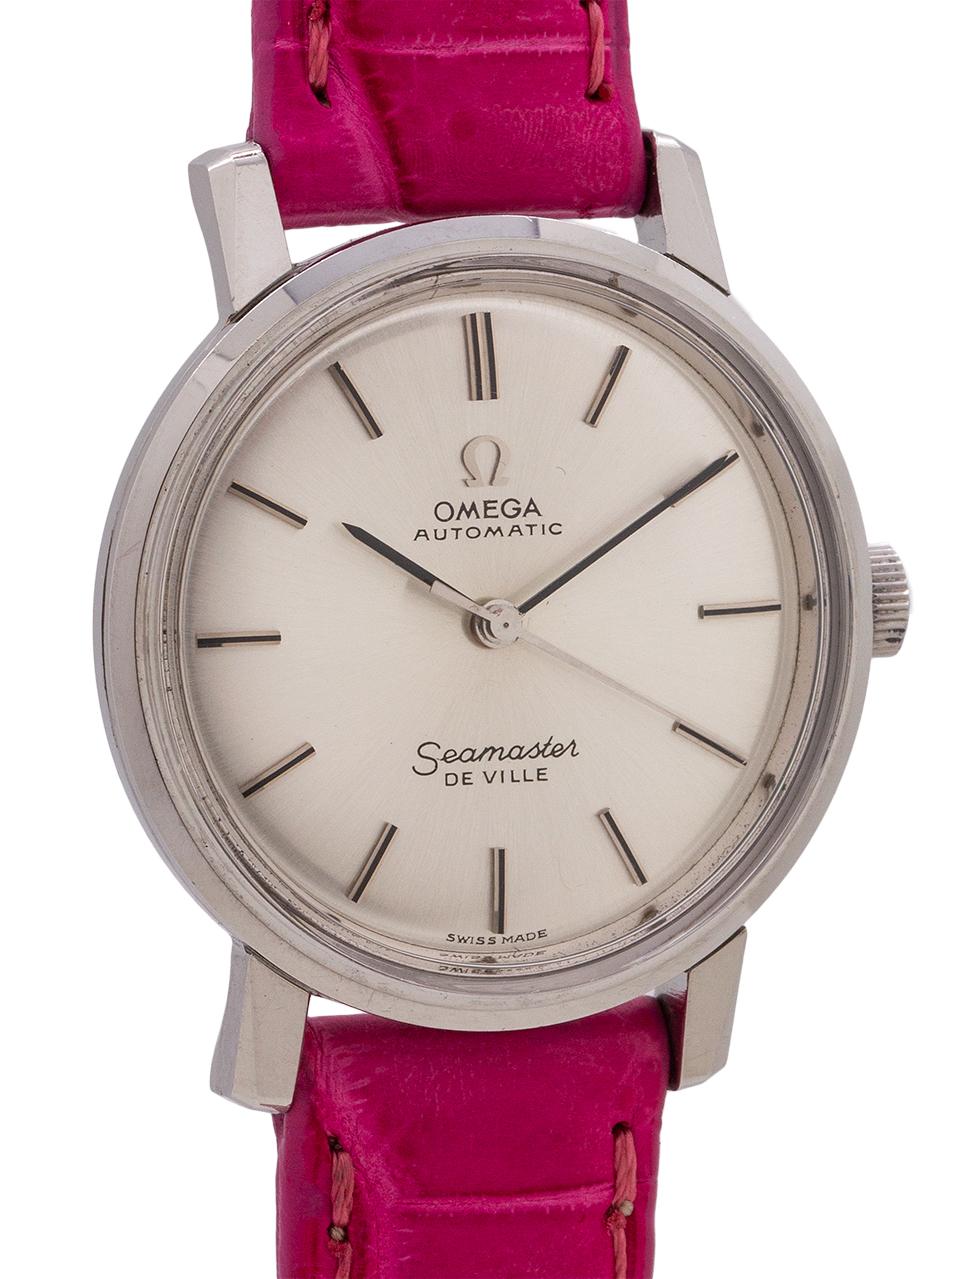 
Omega Lady’s automatic Deville stainless steel ref 165.016 circa 1966. Featuring a 28mm case with short lugs and Seamaster case back, and with original silver satin dial with applied silver indexes, applied Omega logo and silver baton hands.